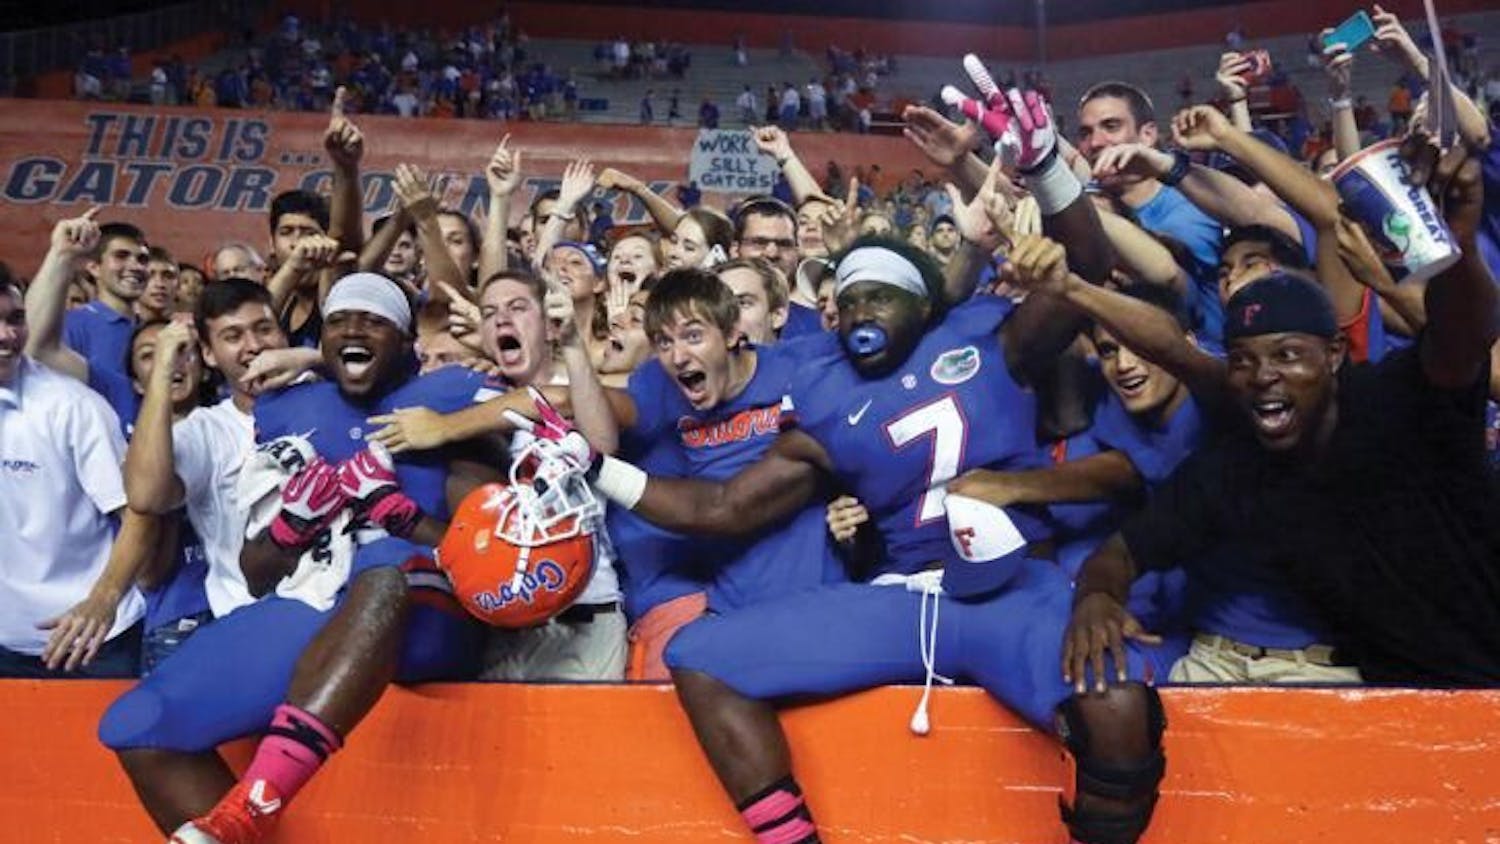 Florida will welcome six teams by the Swamp, headlined by Alabama and Florida State.